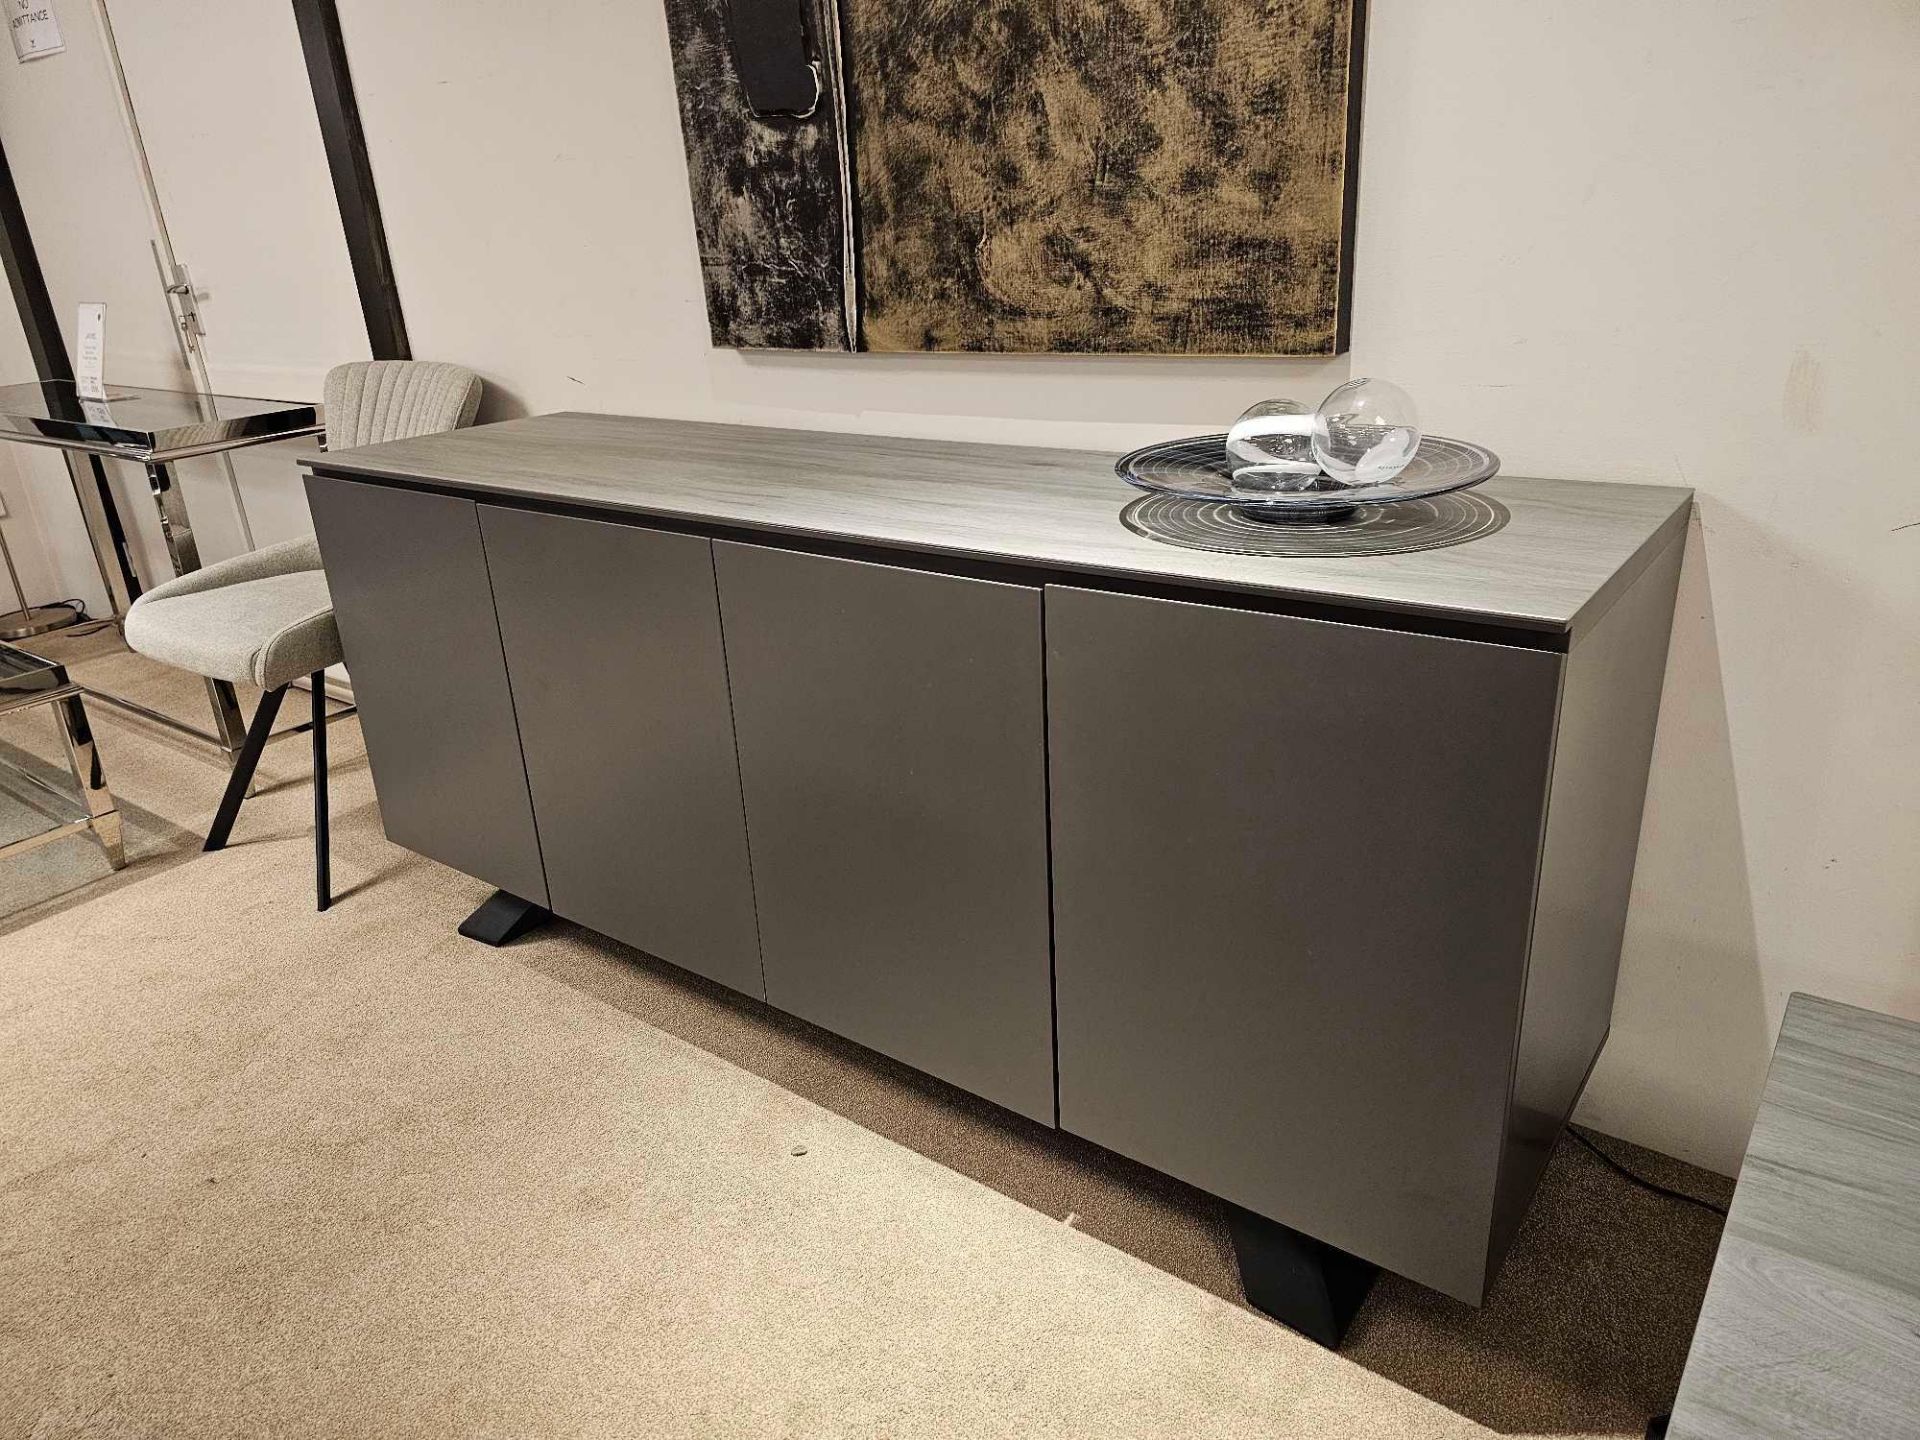 Spartan Sideboard by Kesterport The Spartan Four Door Sideboard provides is striking as a stand - Bild 3 aus 8